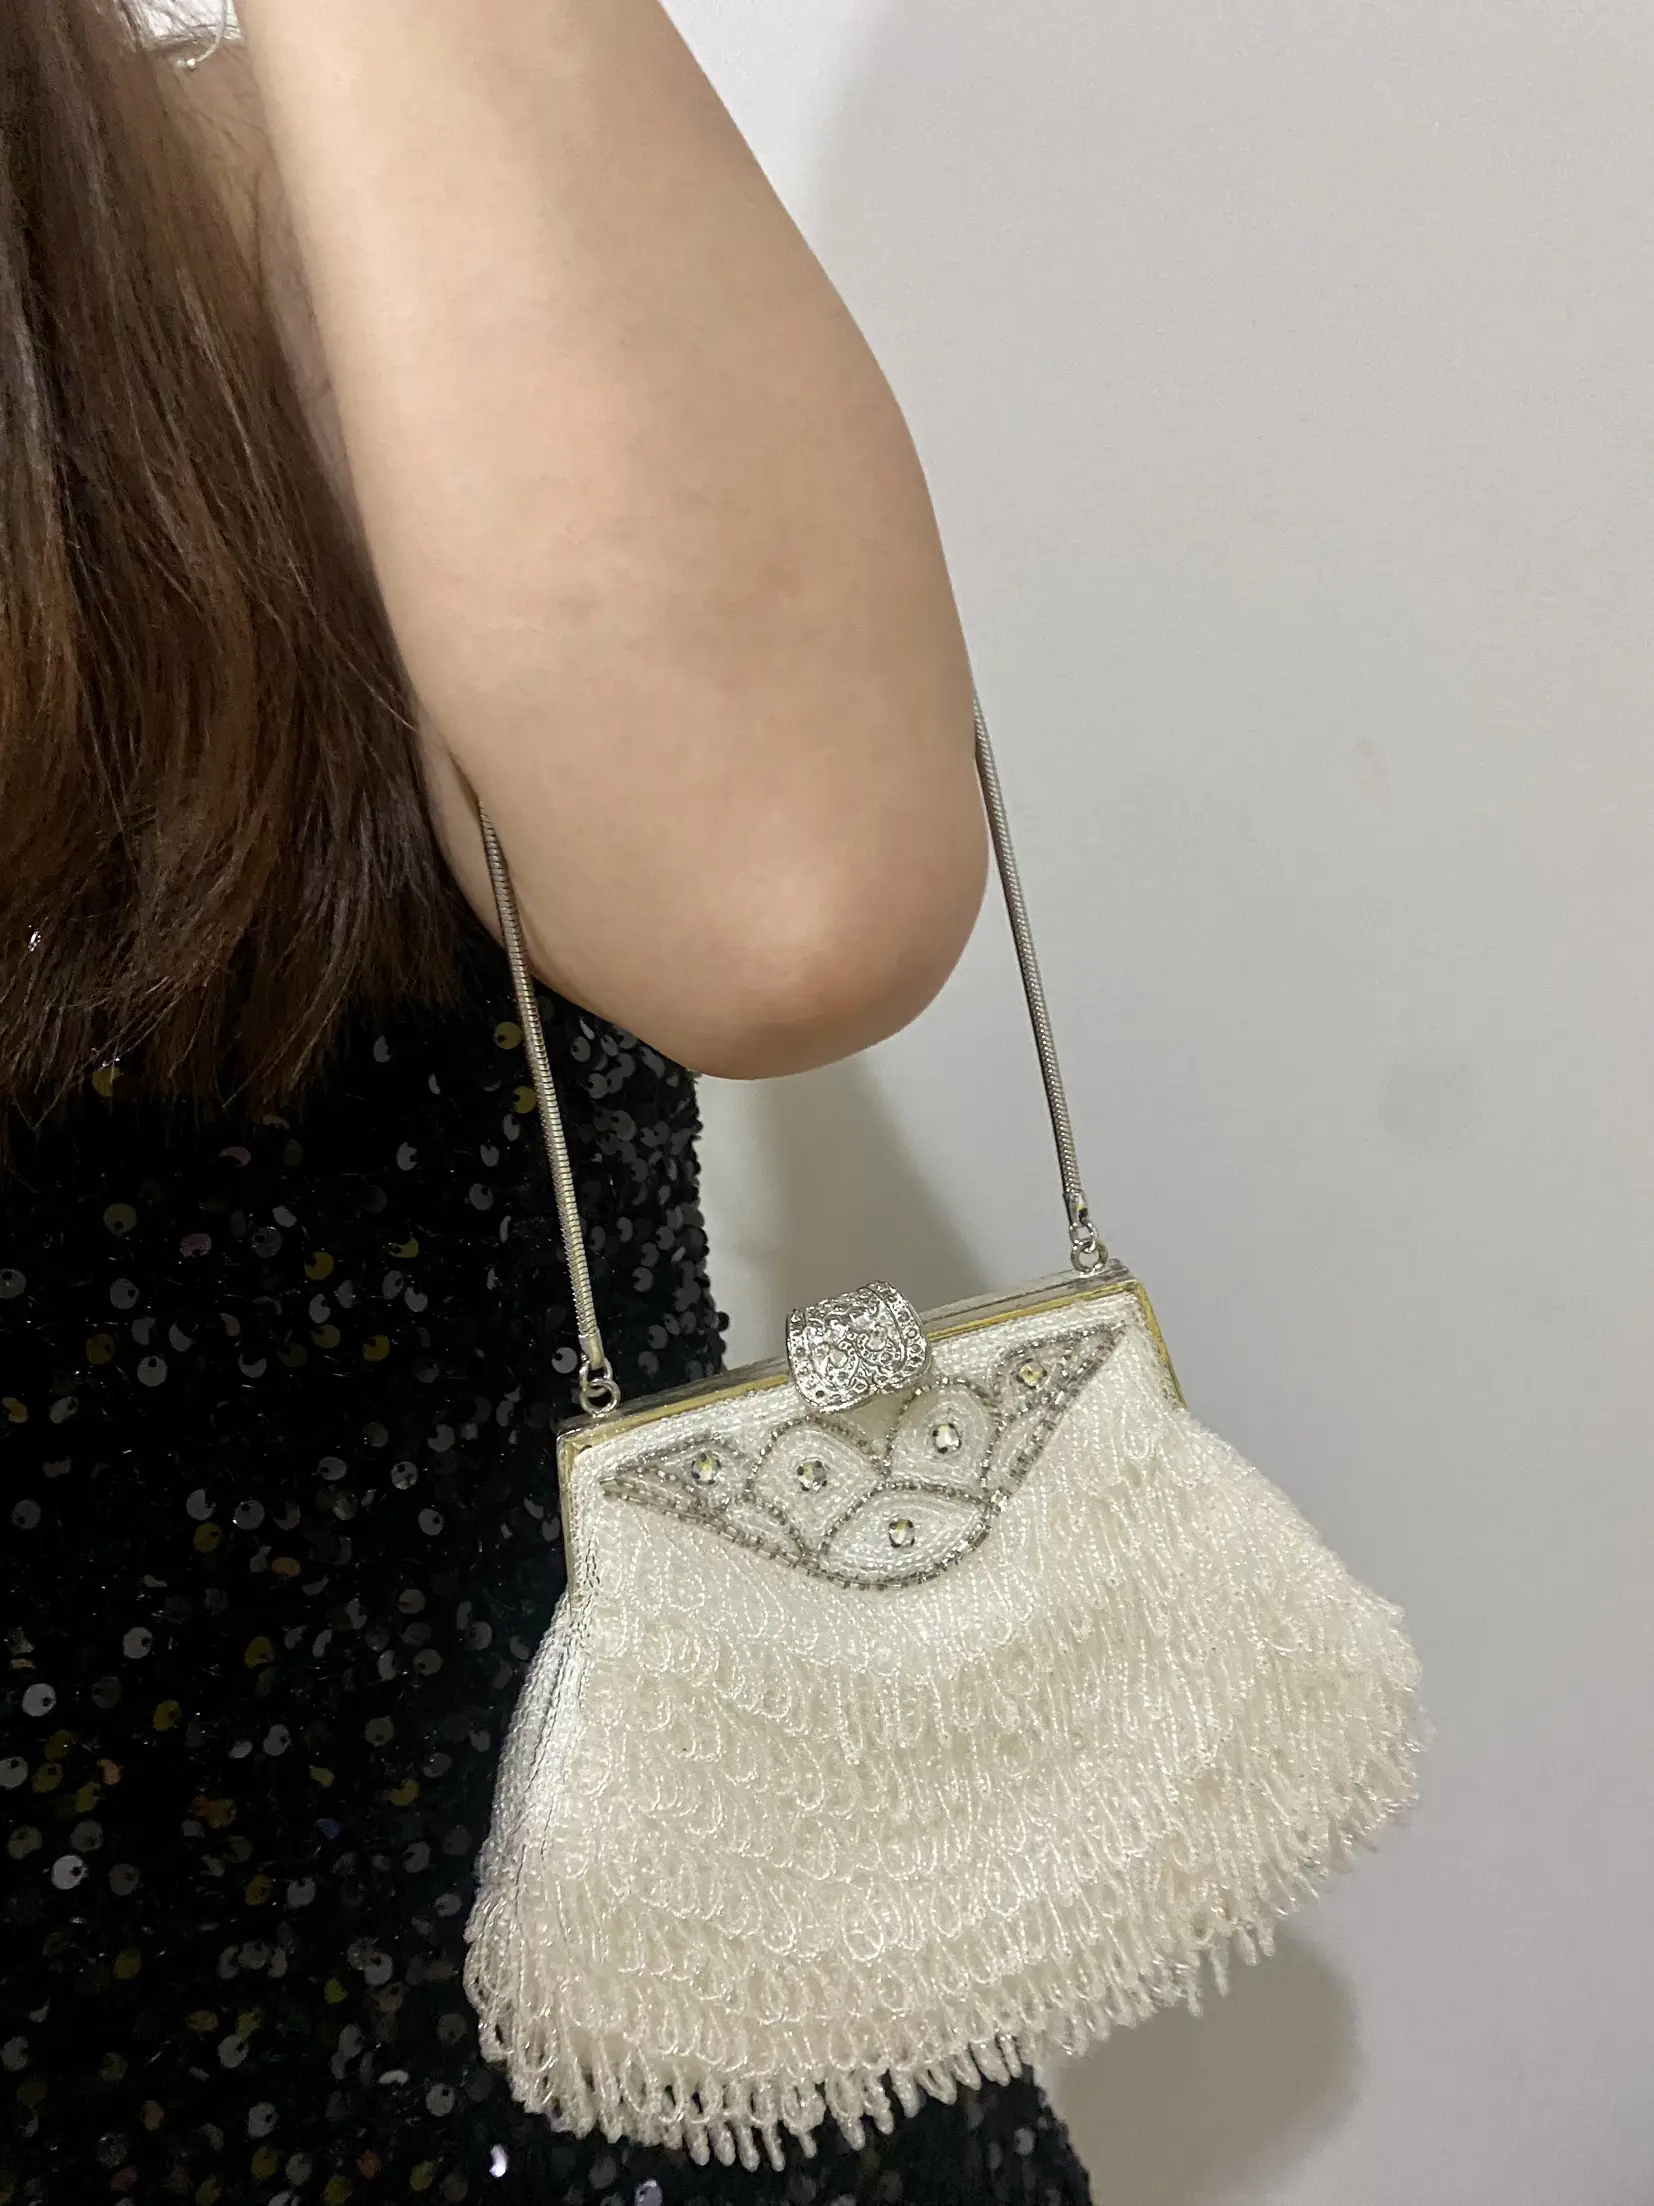 Vintage small pearl beaded evening bag with leaf - Depop